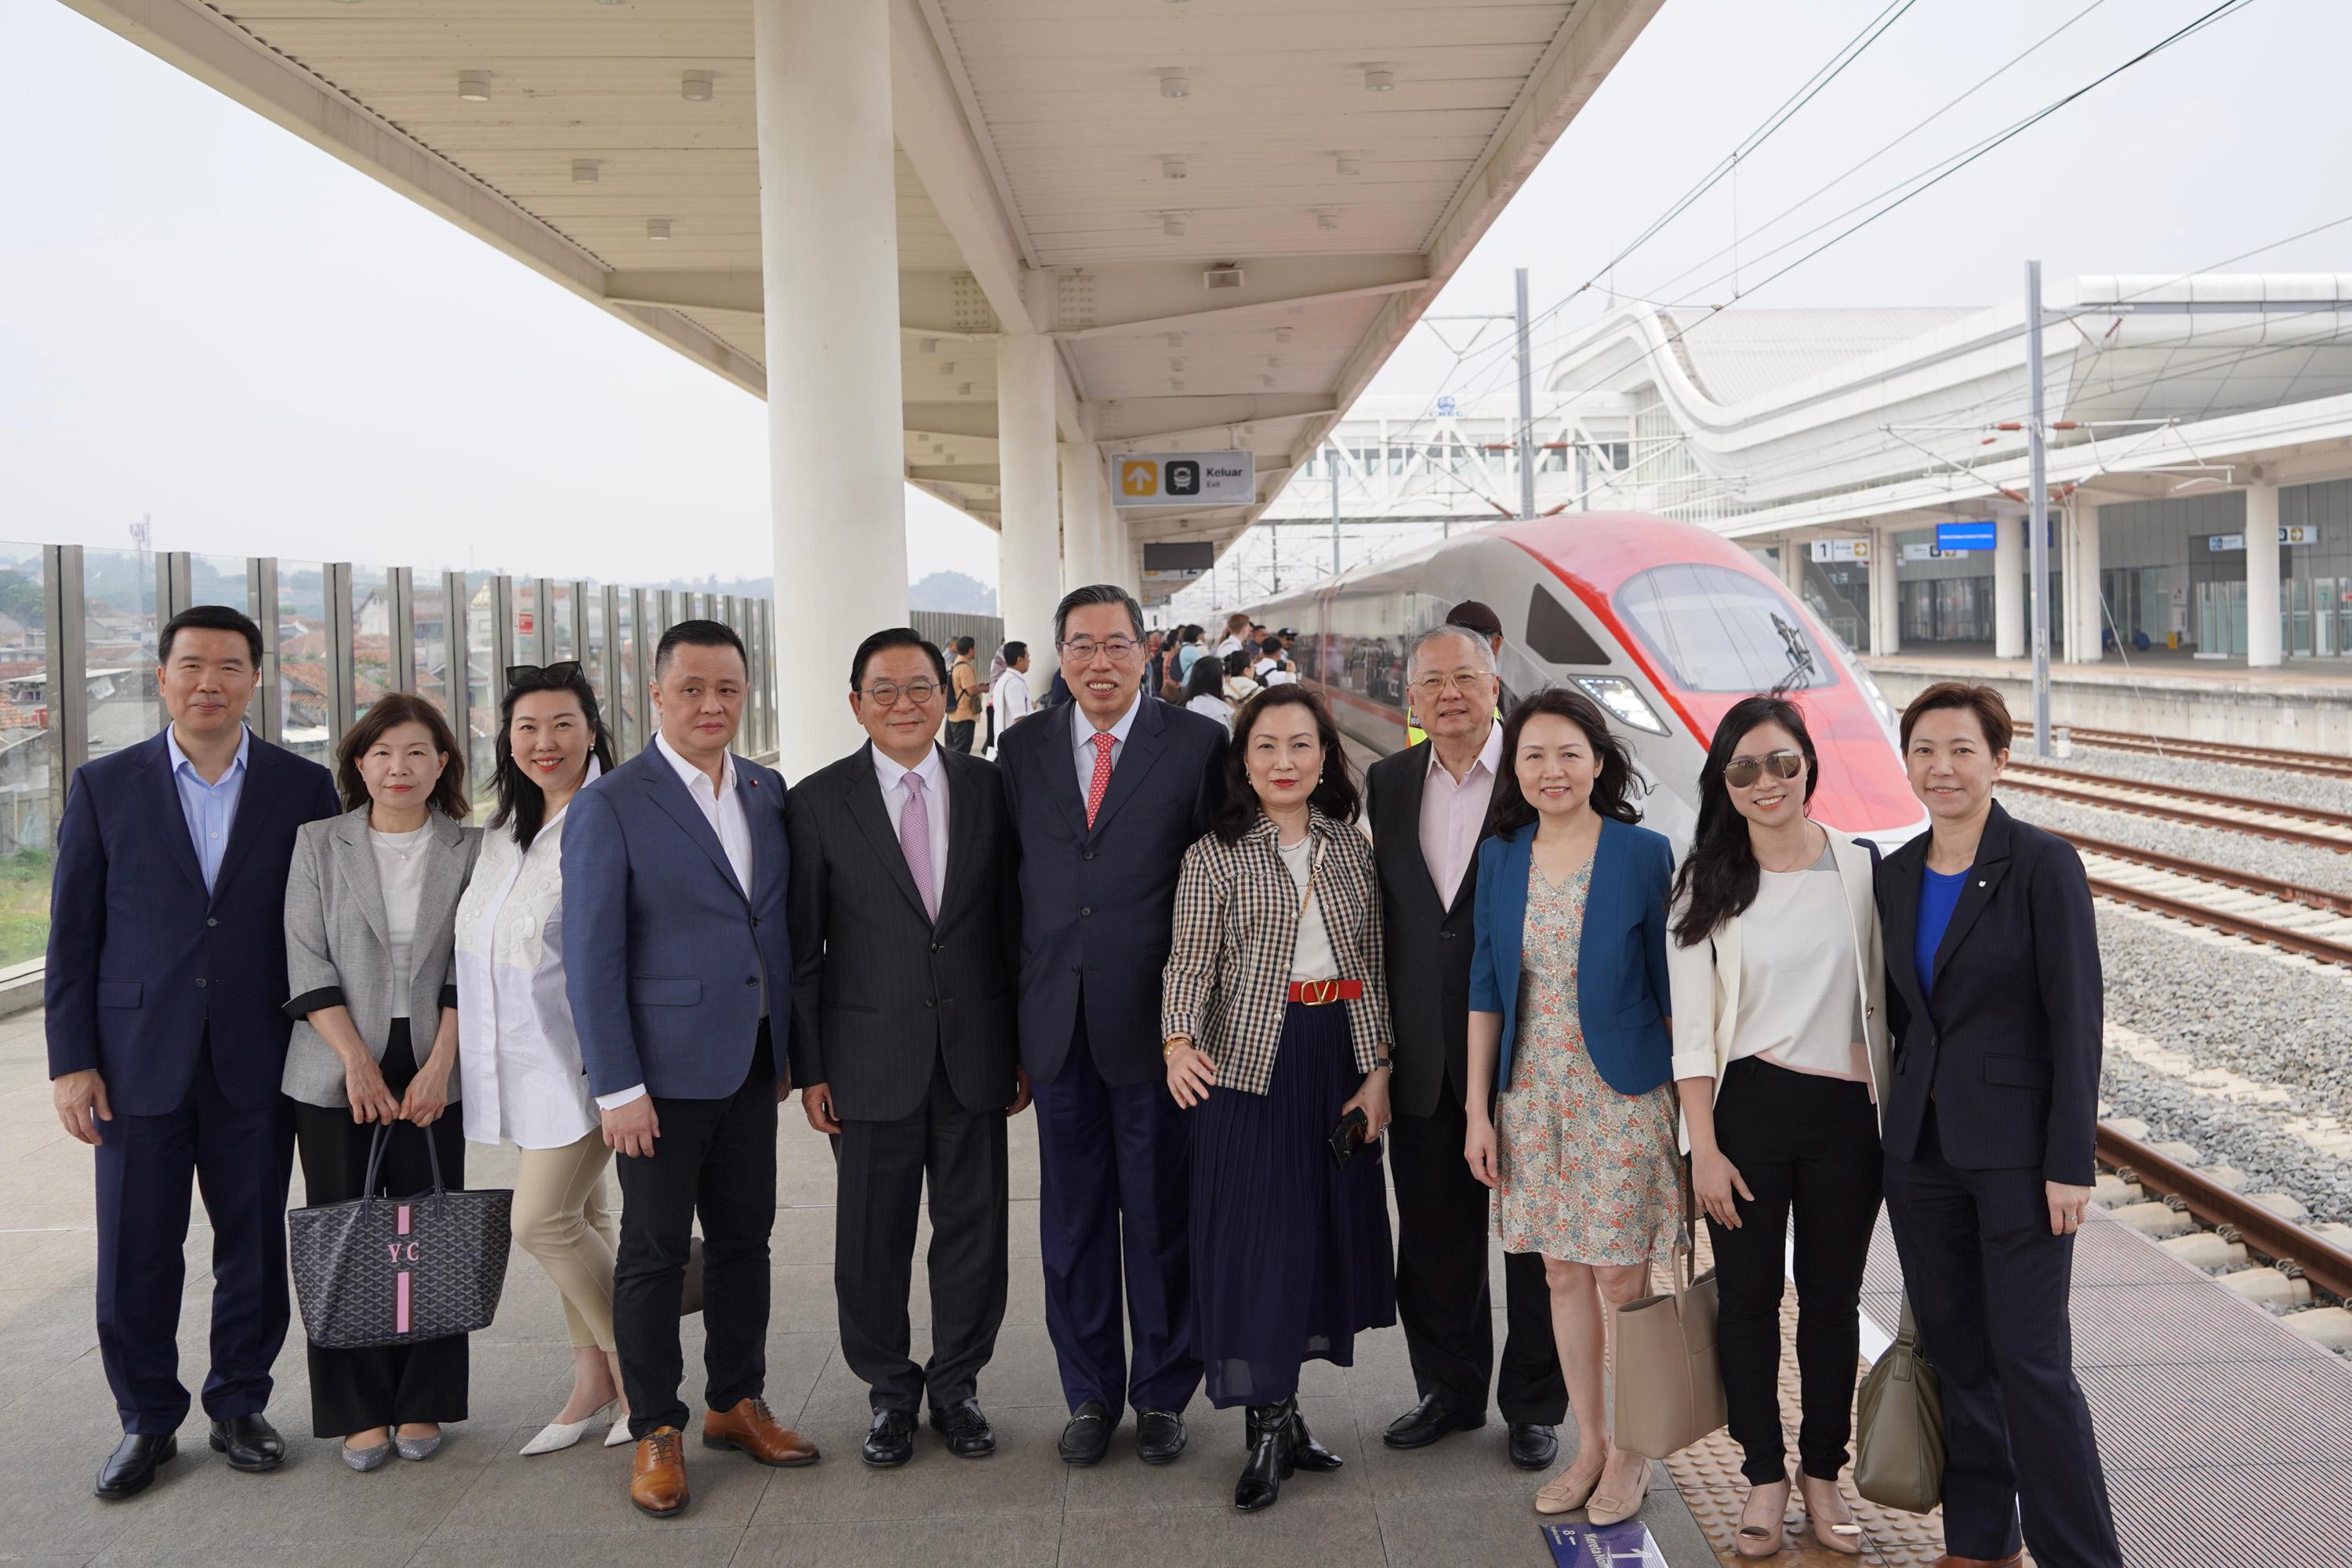 The Legislative Council delegation continued its duty visit in Indonesia today (May 15). Photo shows the delegation takes a ride on the Jakarta-Bandung High-Speed Railway.
